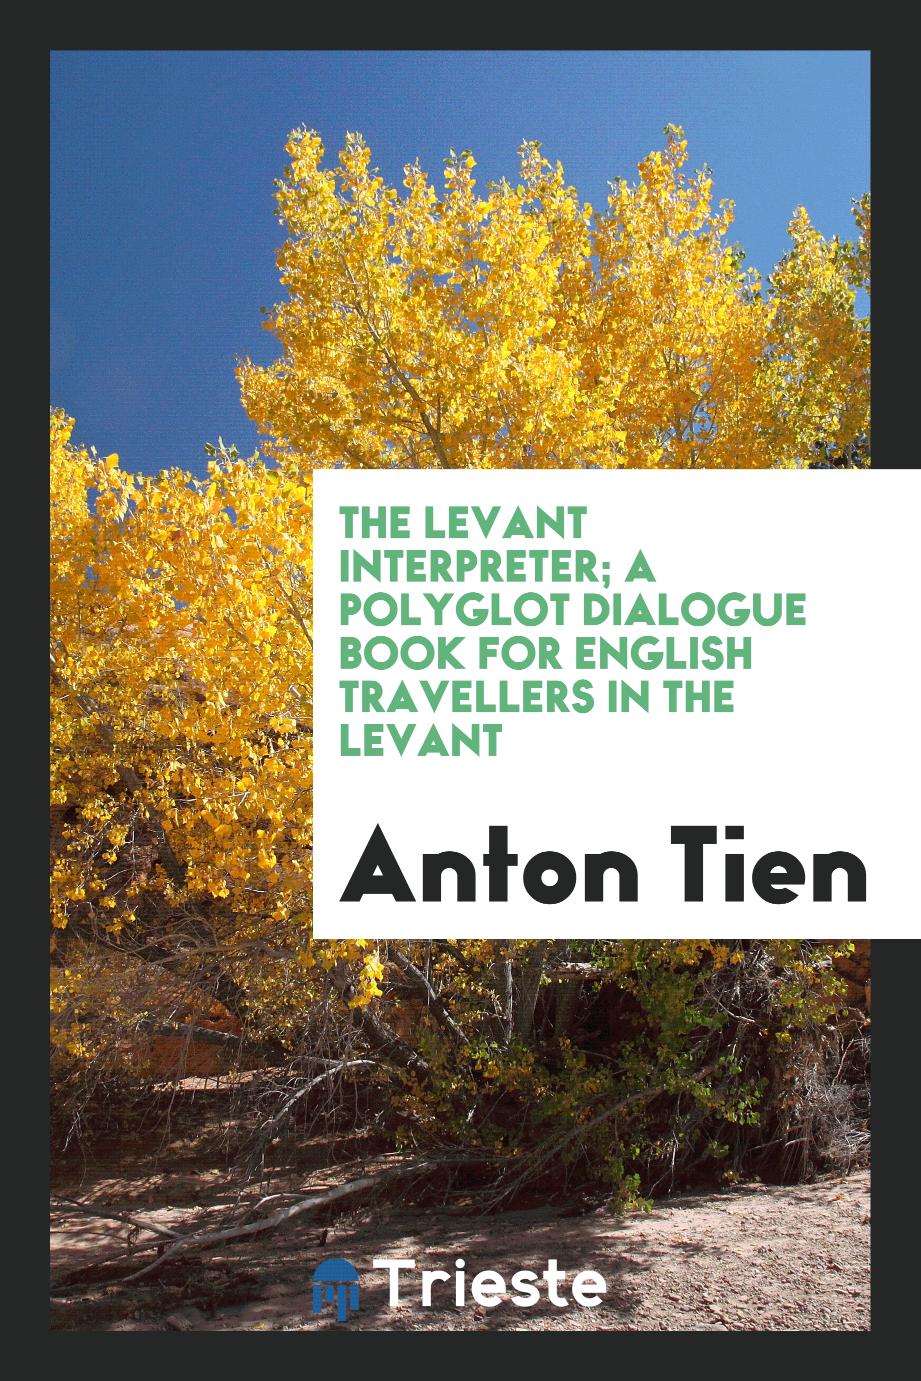 The Levant Interpreter; A Polyglot Dialogue Book for English Travellers in the Levant